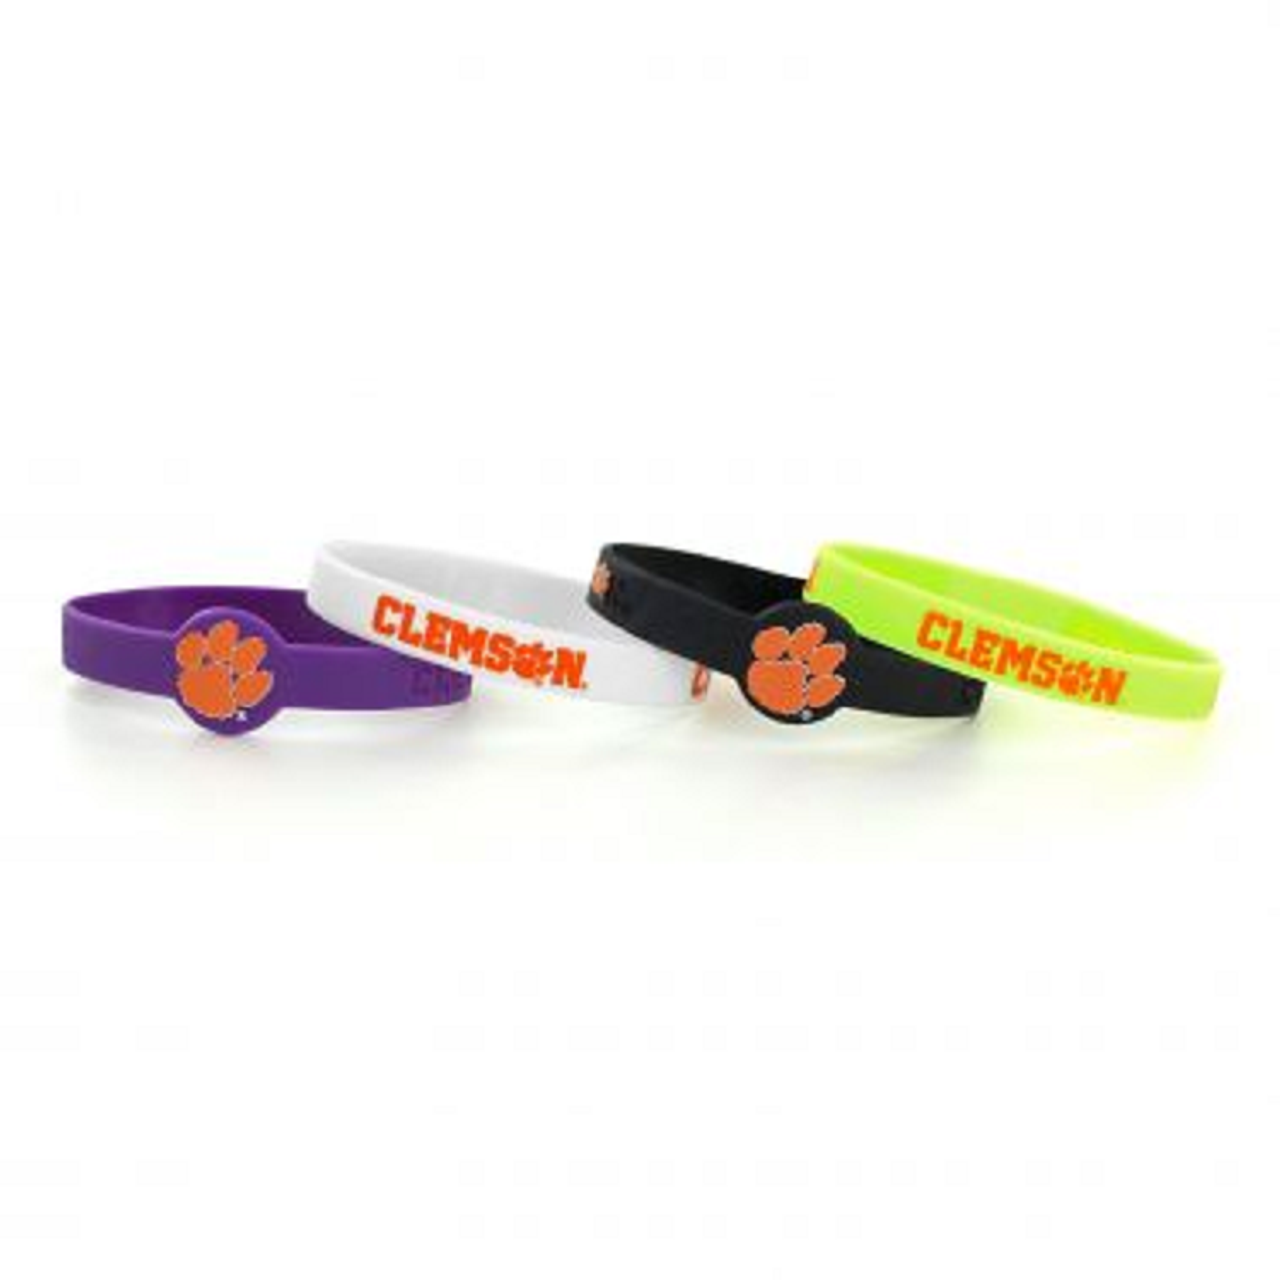 Clemson Tigers Bracelets 4 Pack Silicone